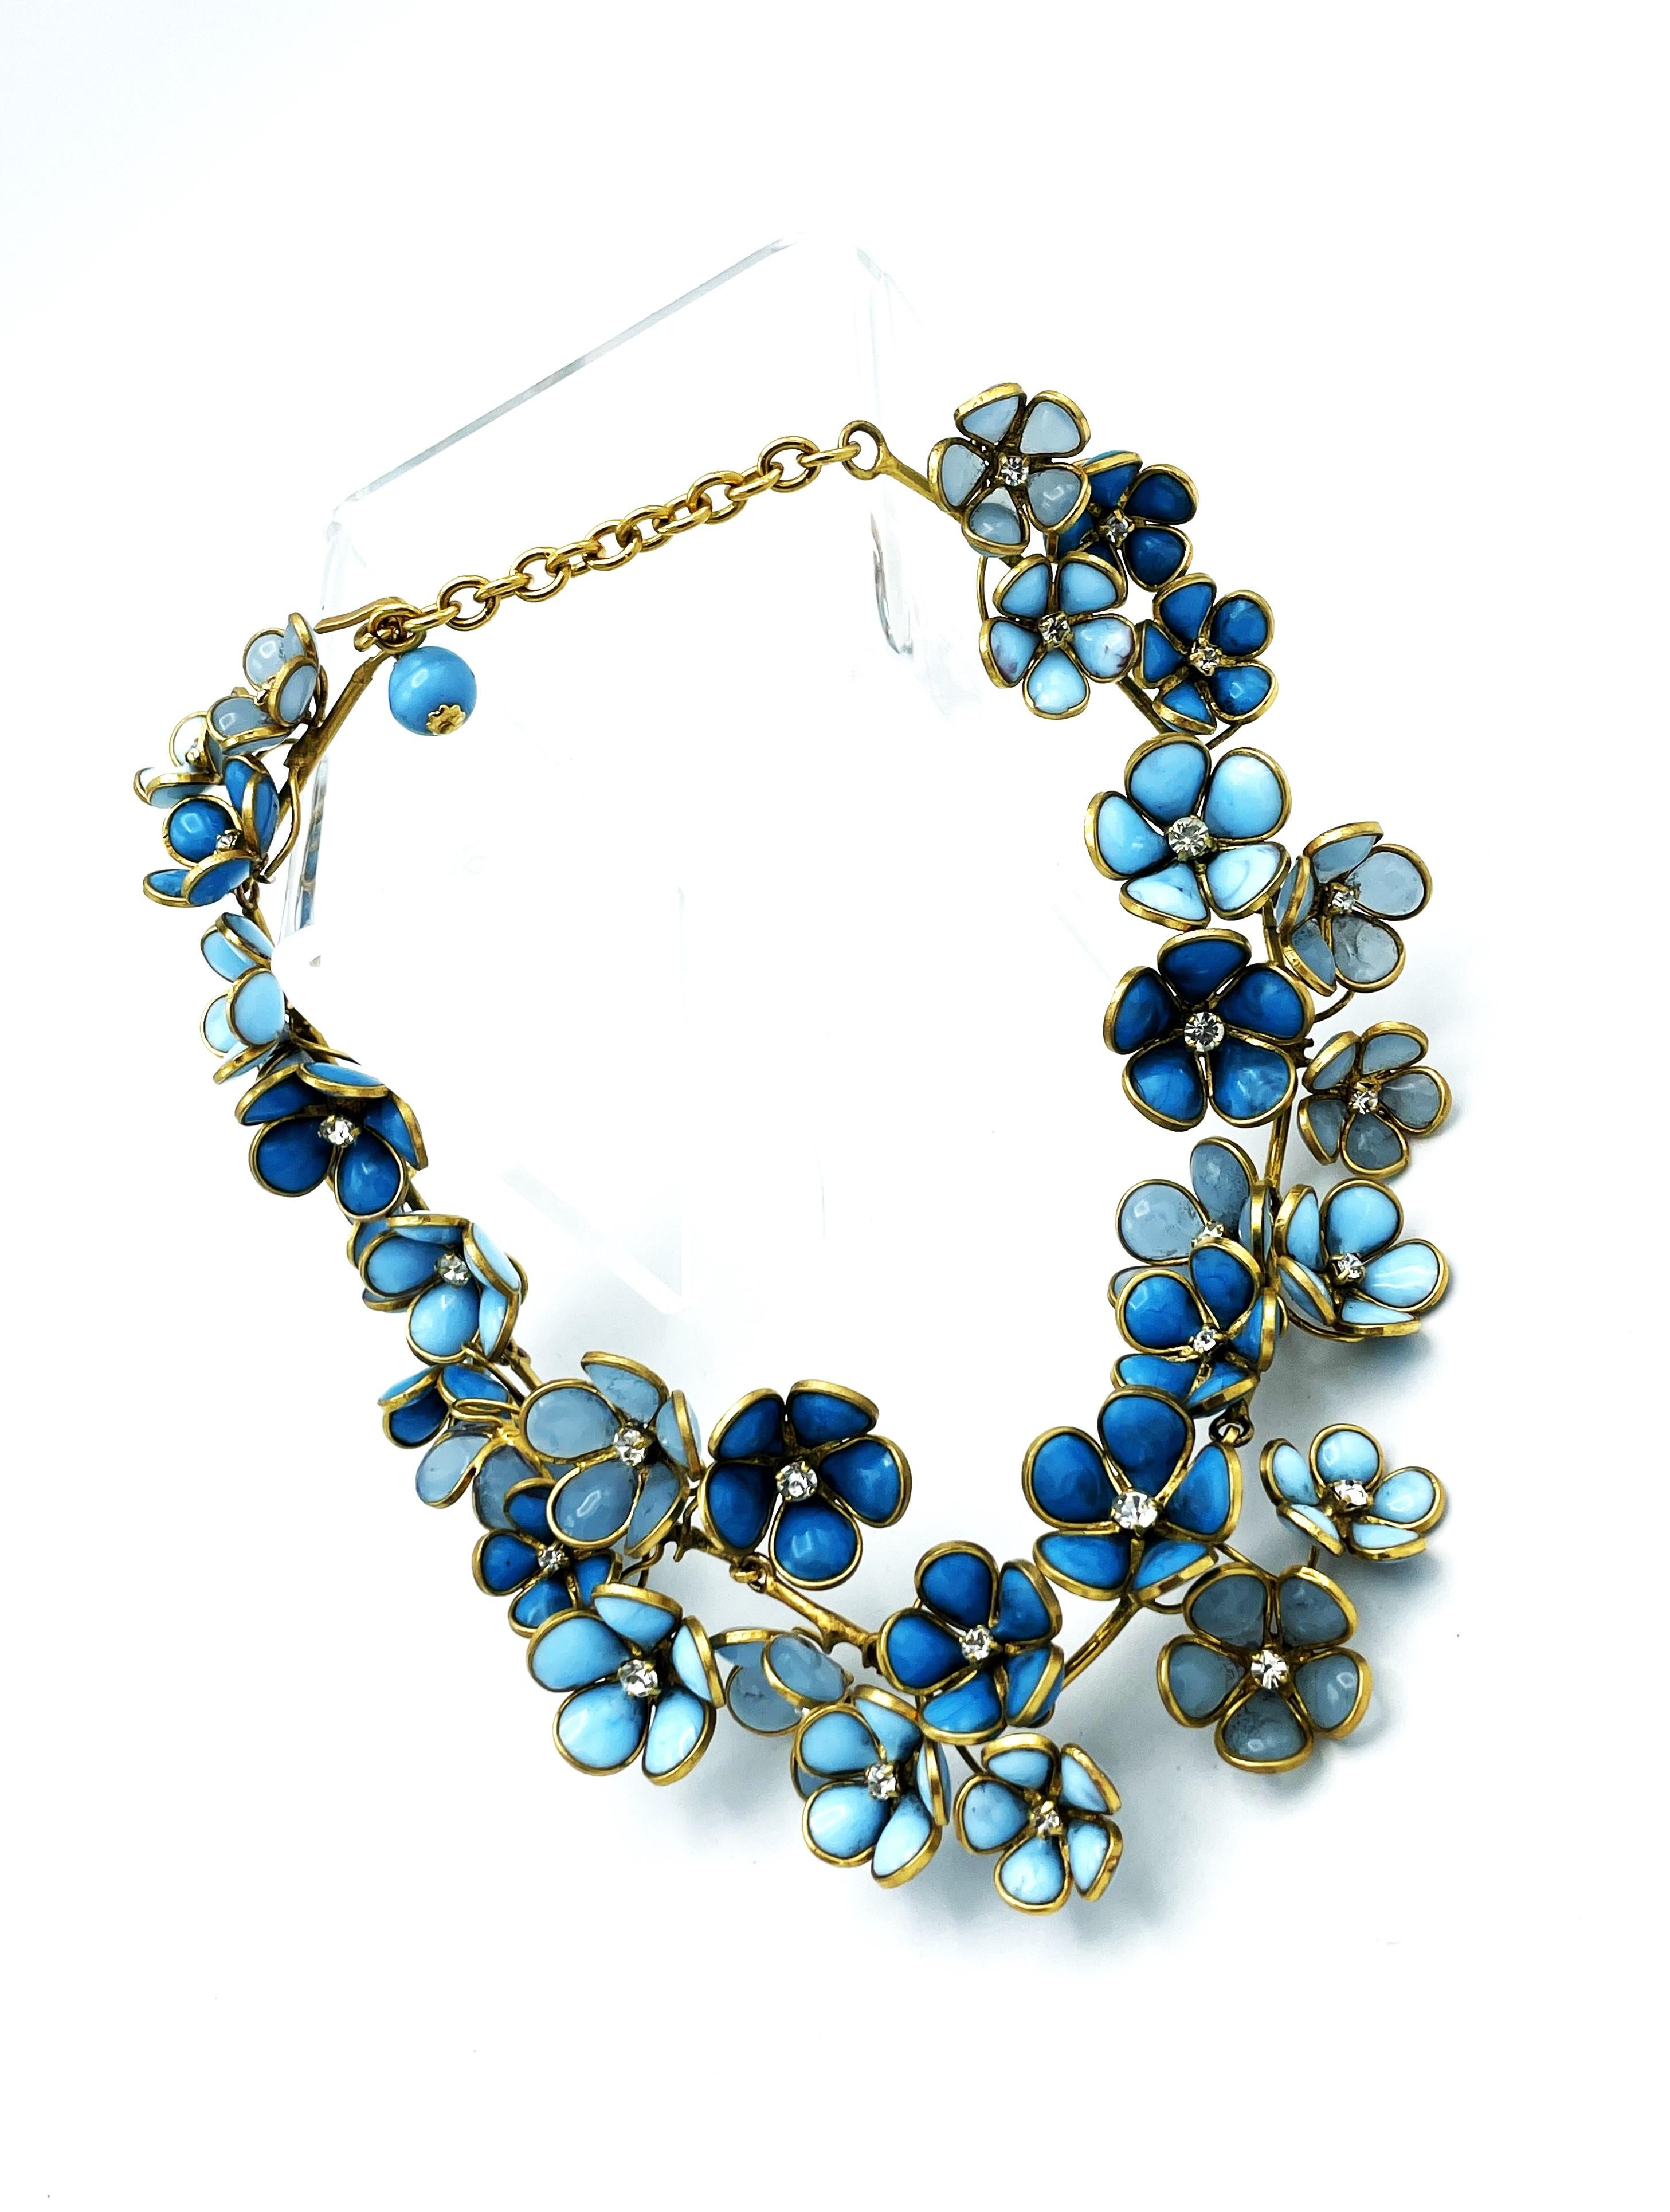 Necklace of many blue glass flowers from Gripoix in the style of Chanel For Sale 1